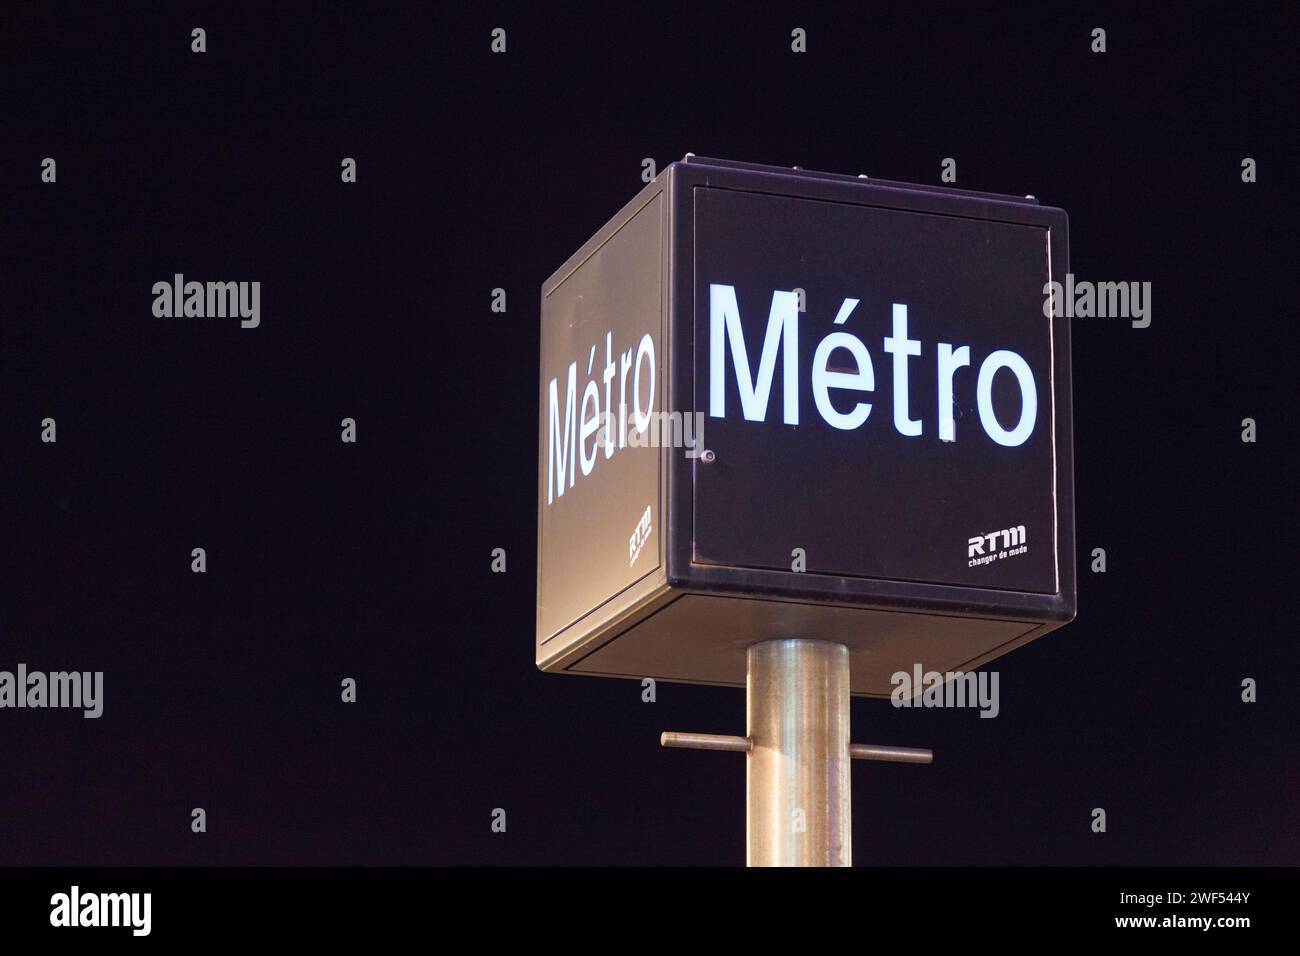 Marseille, France - March 22 2019: Illuminated Marseille Metro (French: Métro de Marseille) outside of a subway station. RTM is the accronym of 'Régie Stock Photo